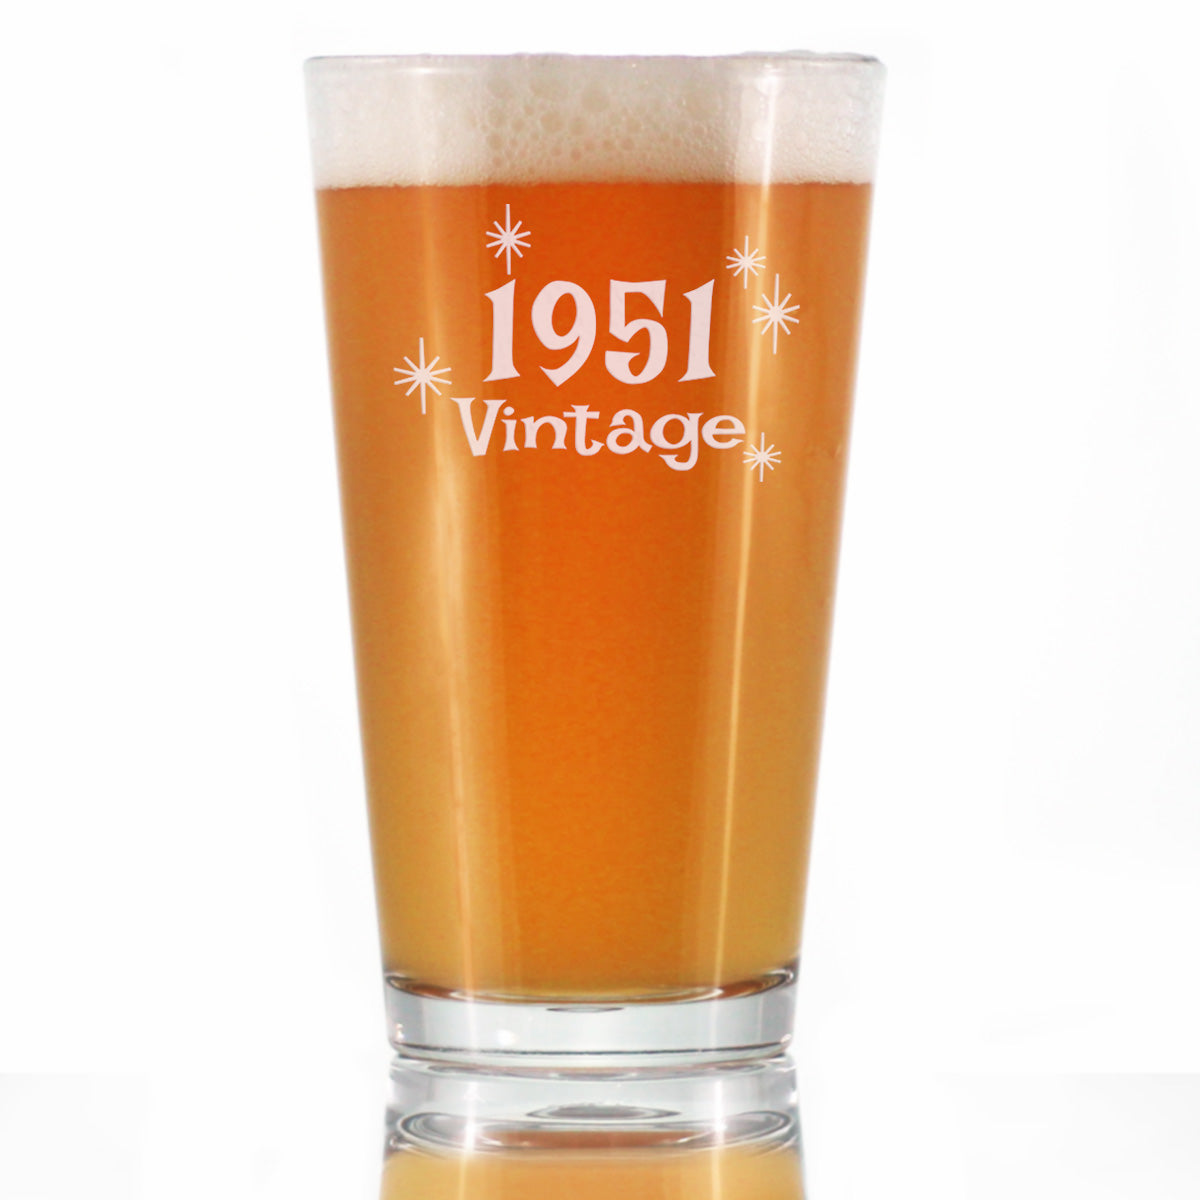 Vintage 1951 - Pint Glass for Beer - 73rd Birthday Gifts for Men or Women Turning 73 - Fun Bday Party Decor - 16 oz